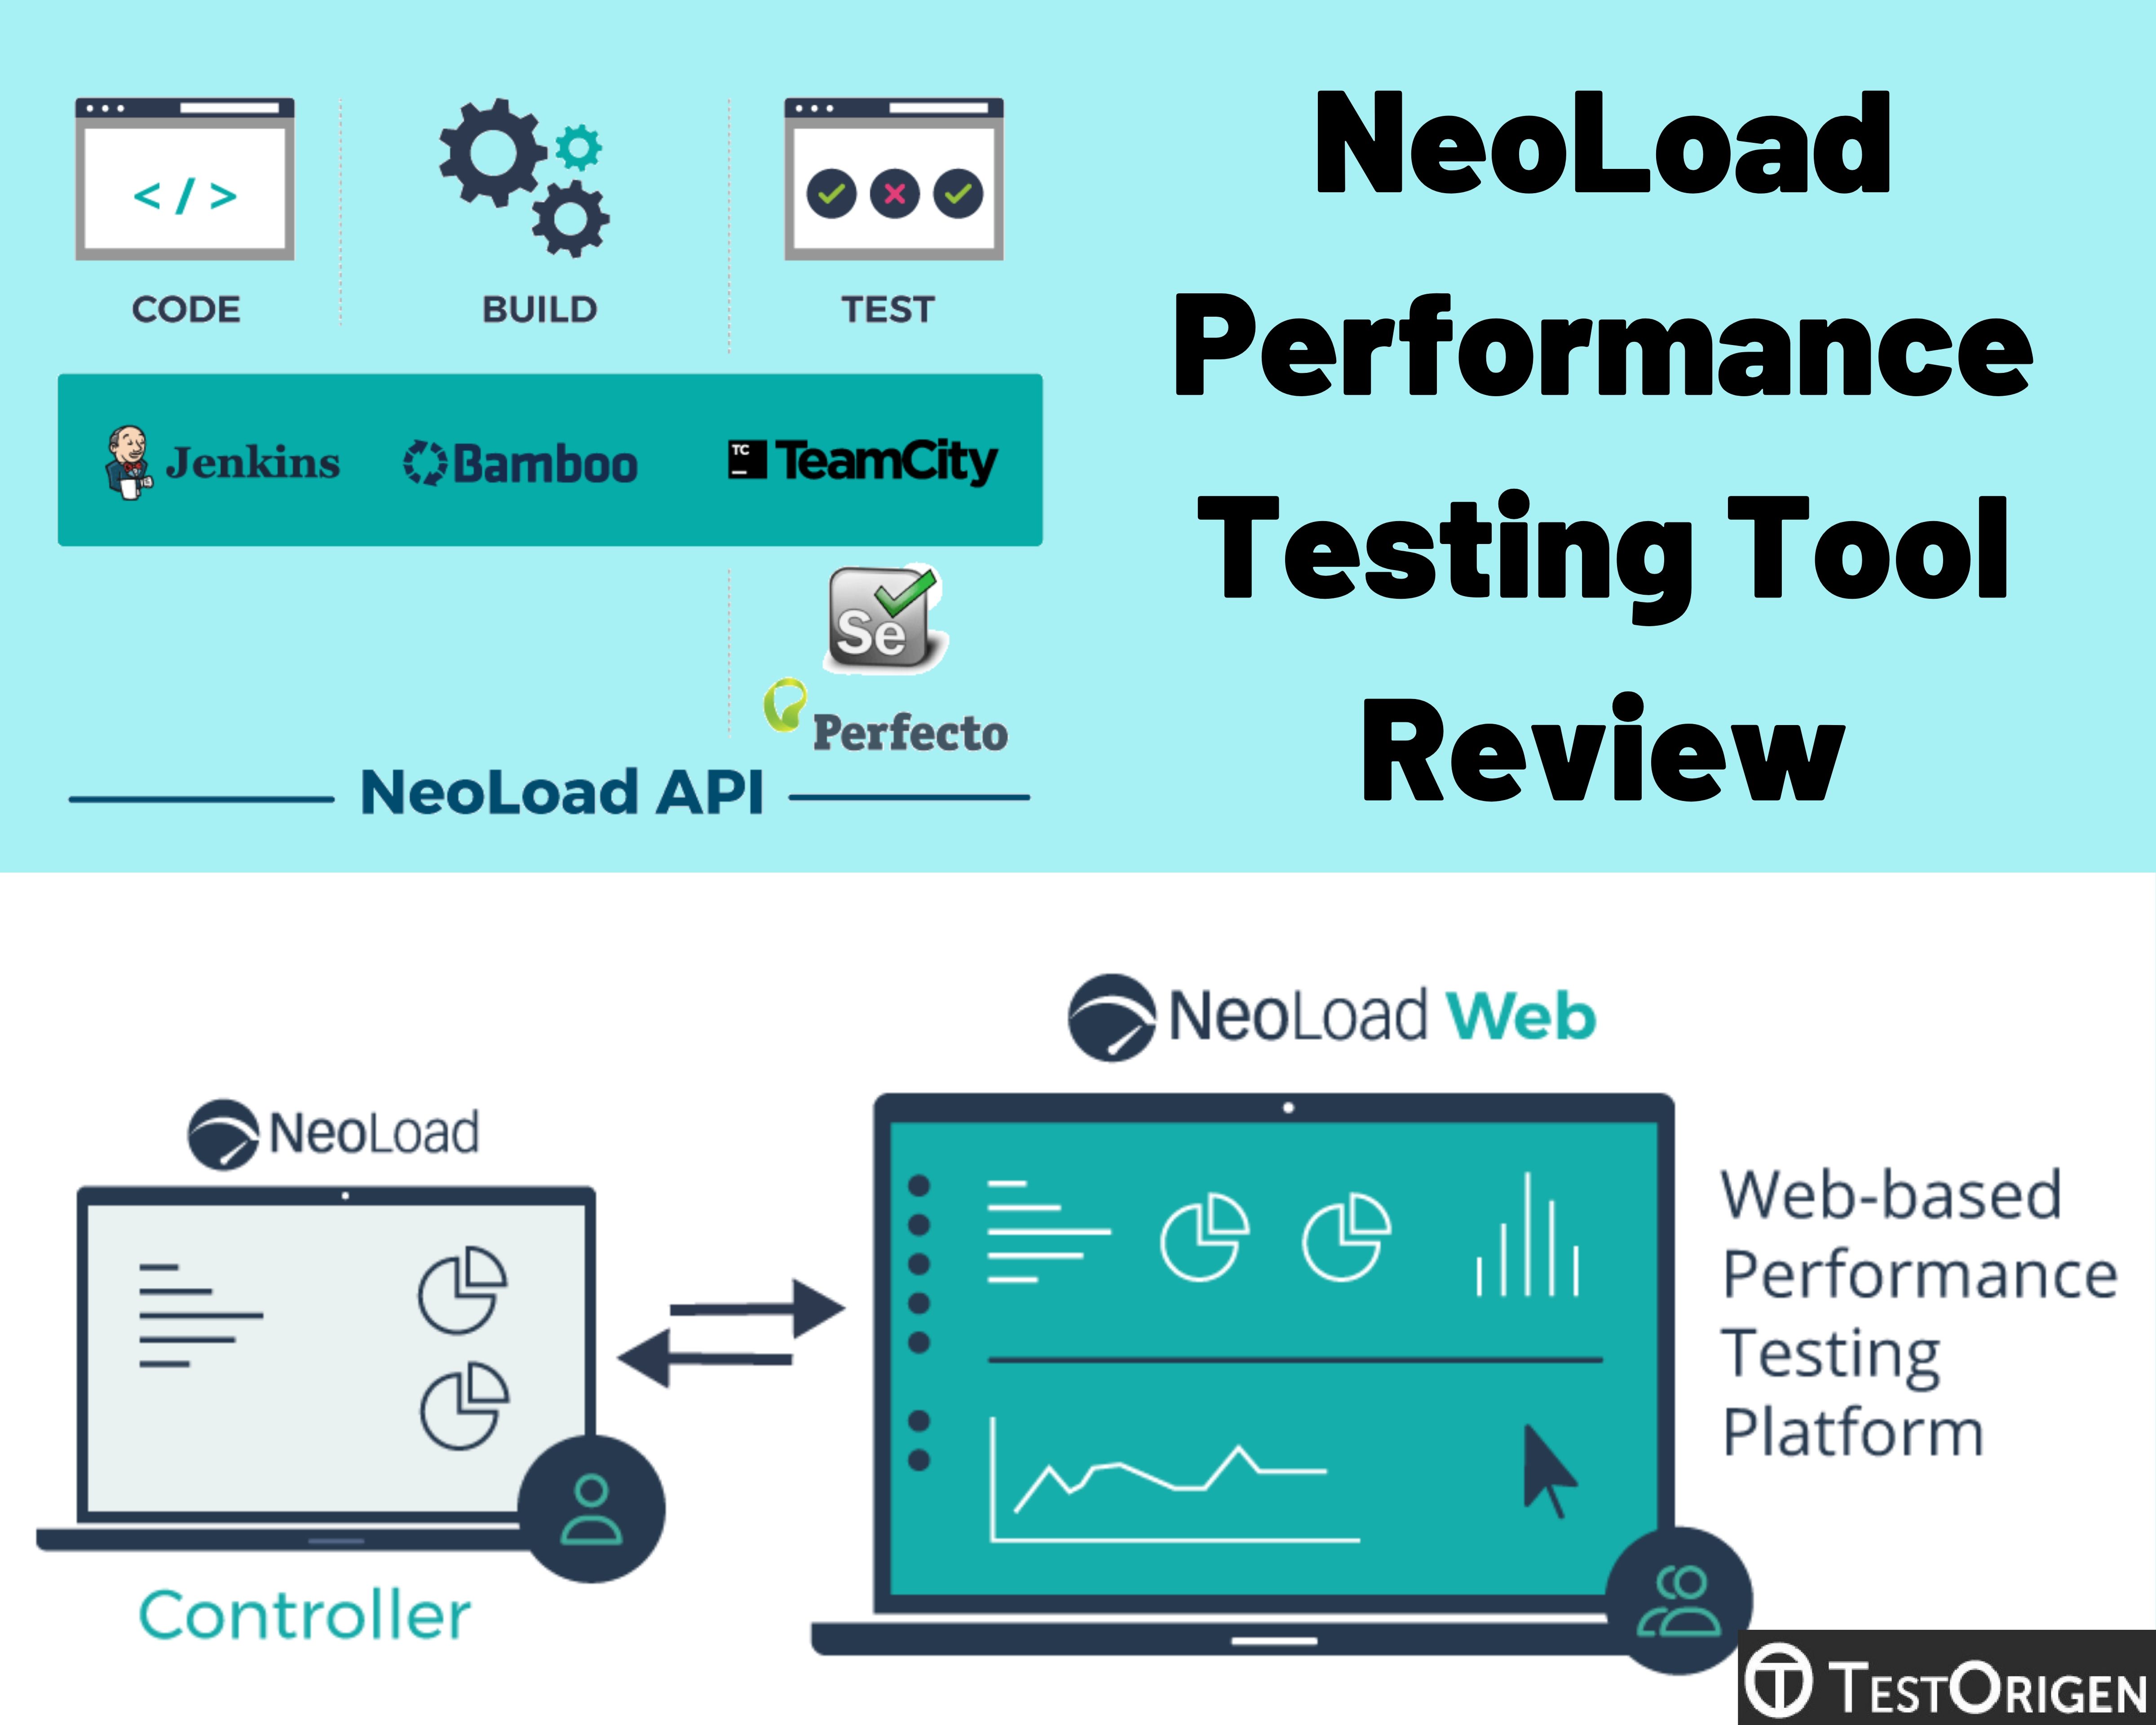 NeoLoad Performance Testing Tool Review